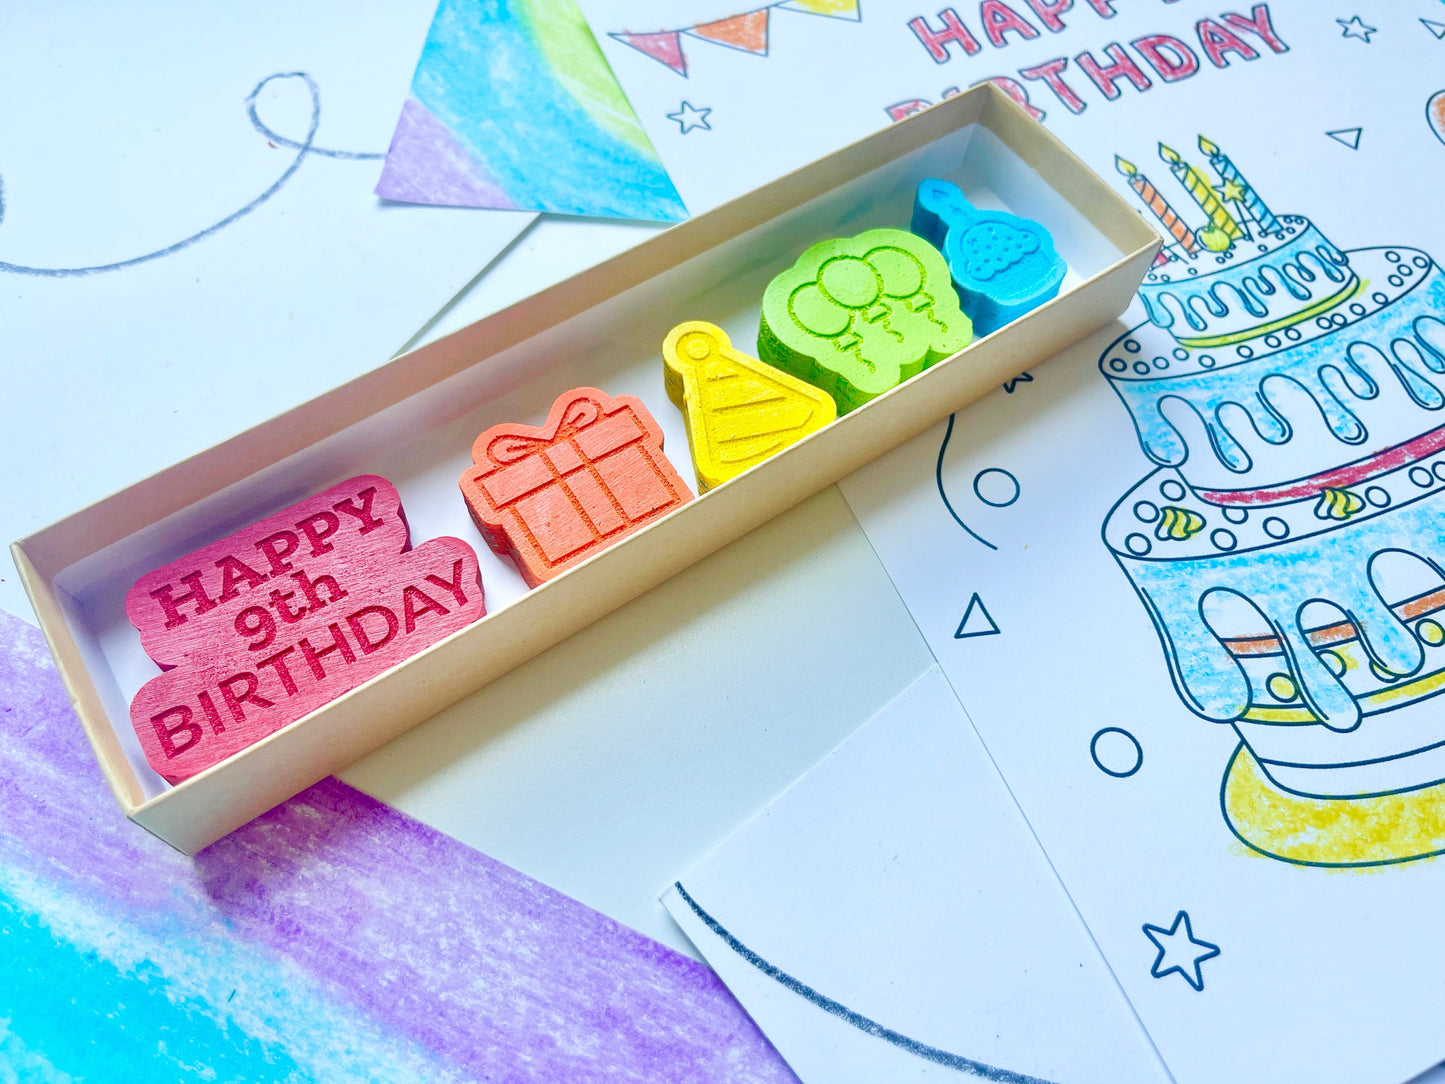 9th Birthday Crayons - 9th Birthday Gifts - Kids Happy Birthday Gifts - Kids Birthday Presents - Gifts For Kids - 9th Birthday Party Favors